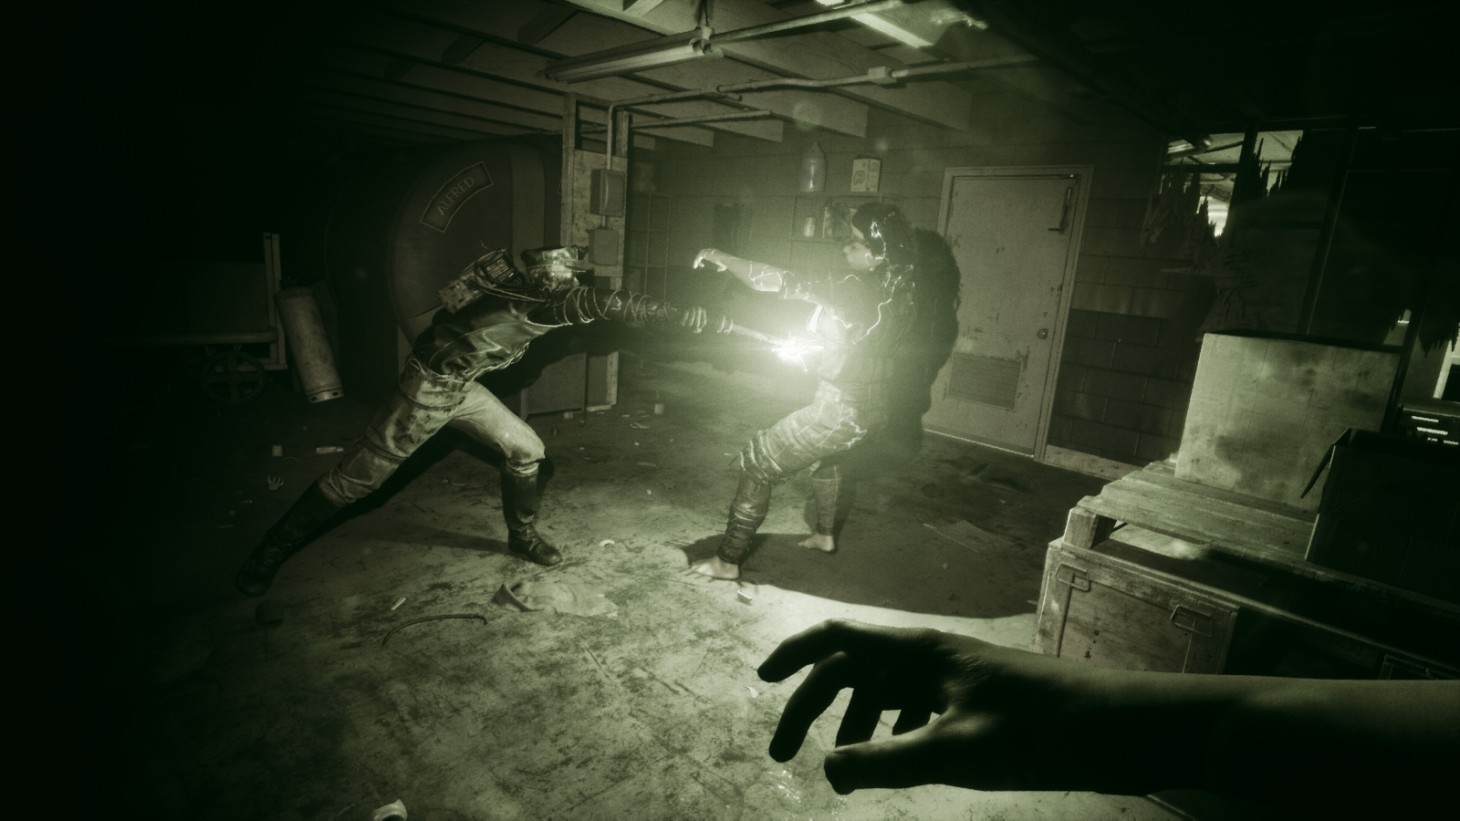 The Outlast Trials – Preview